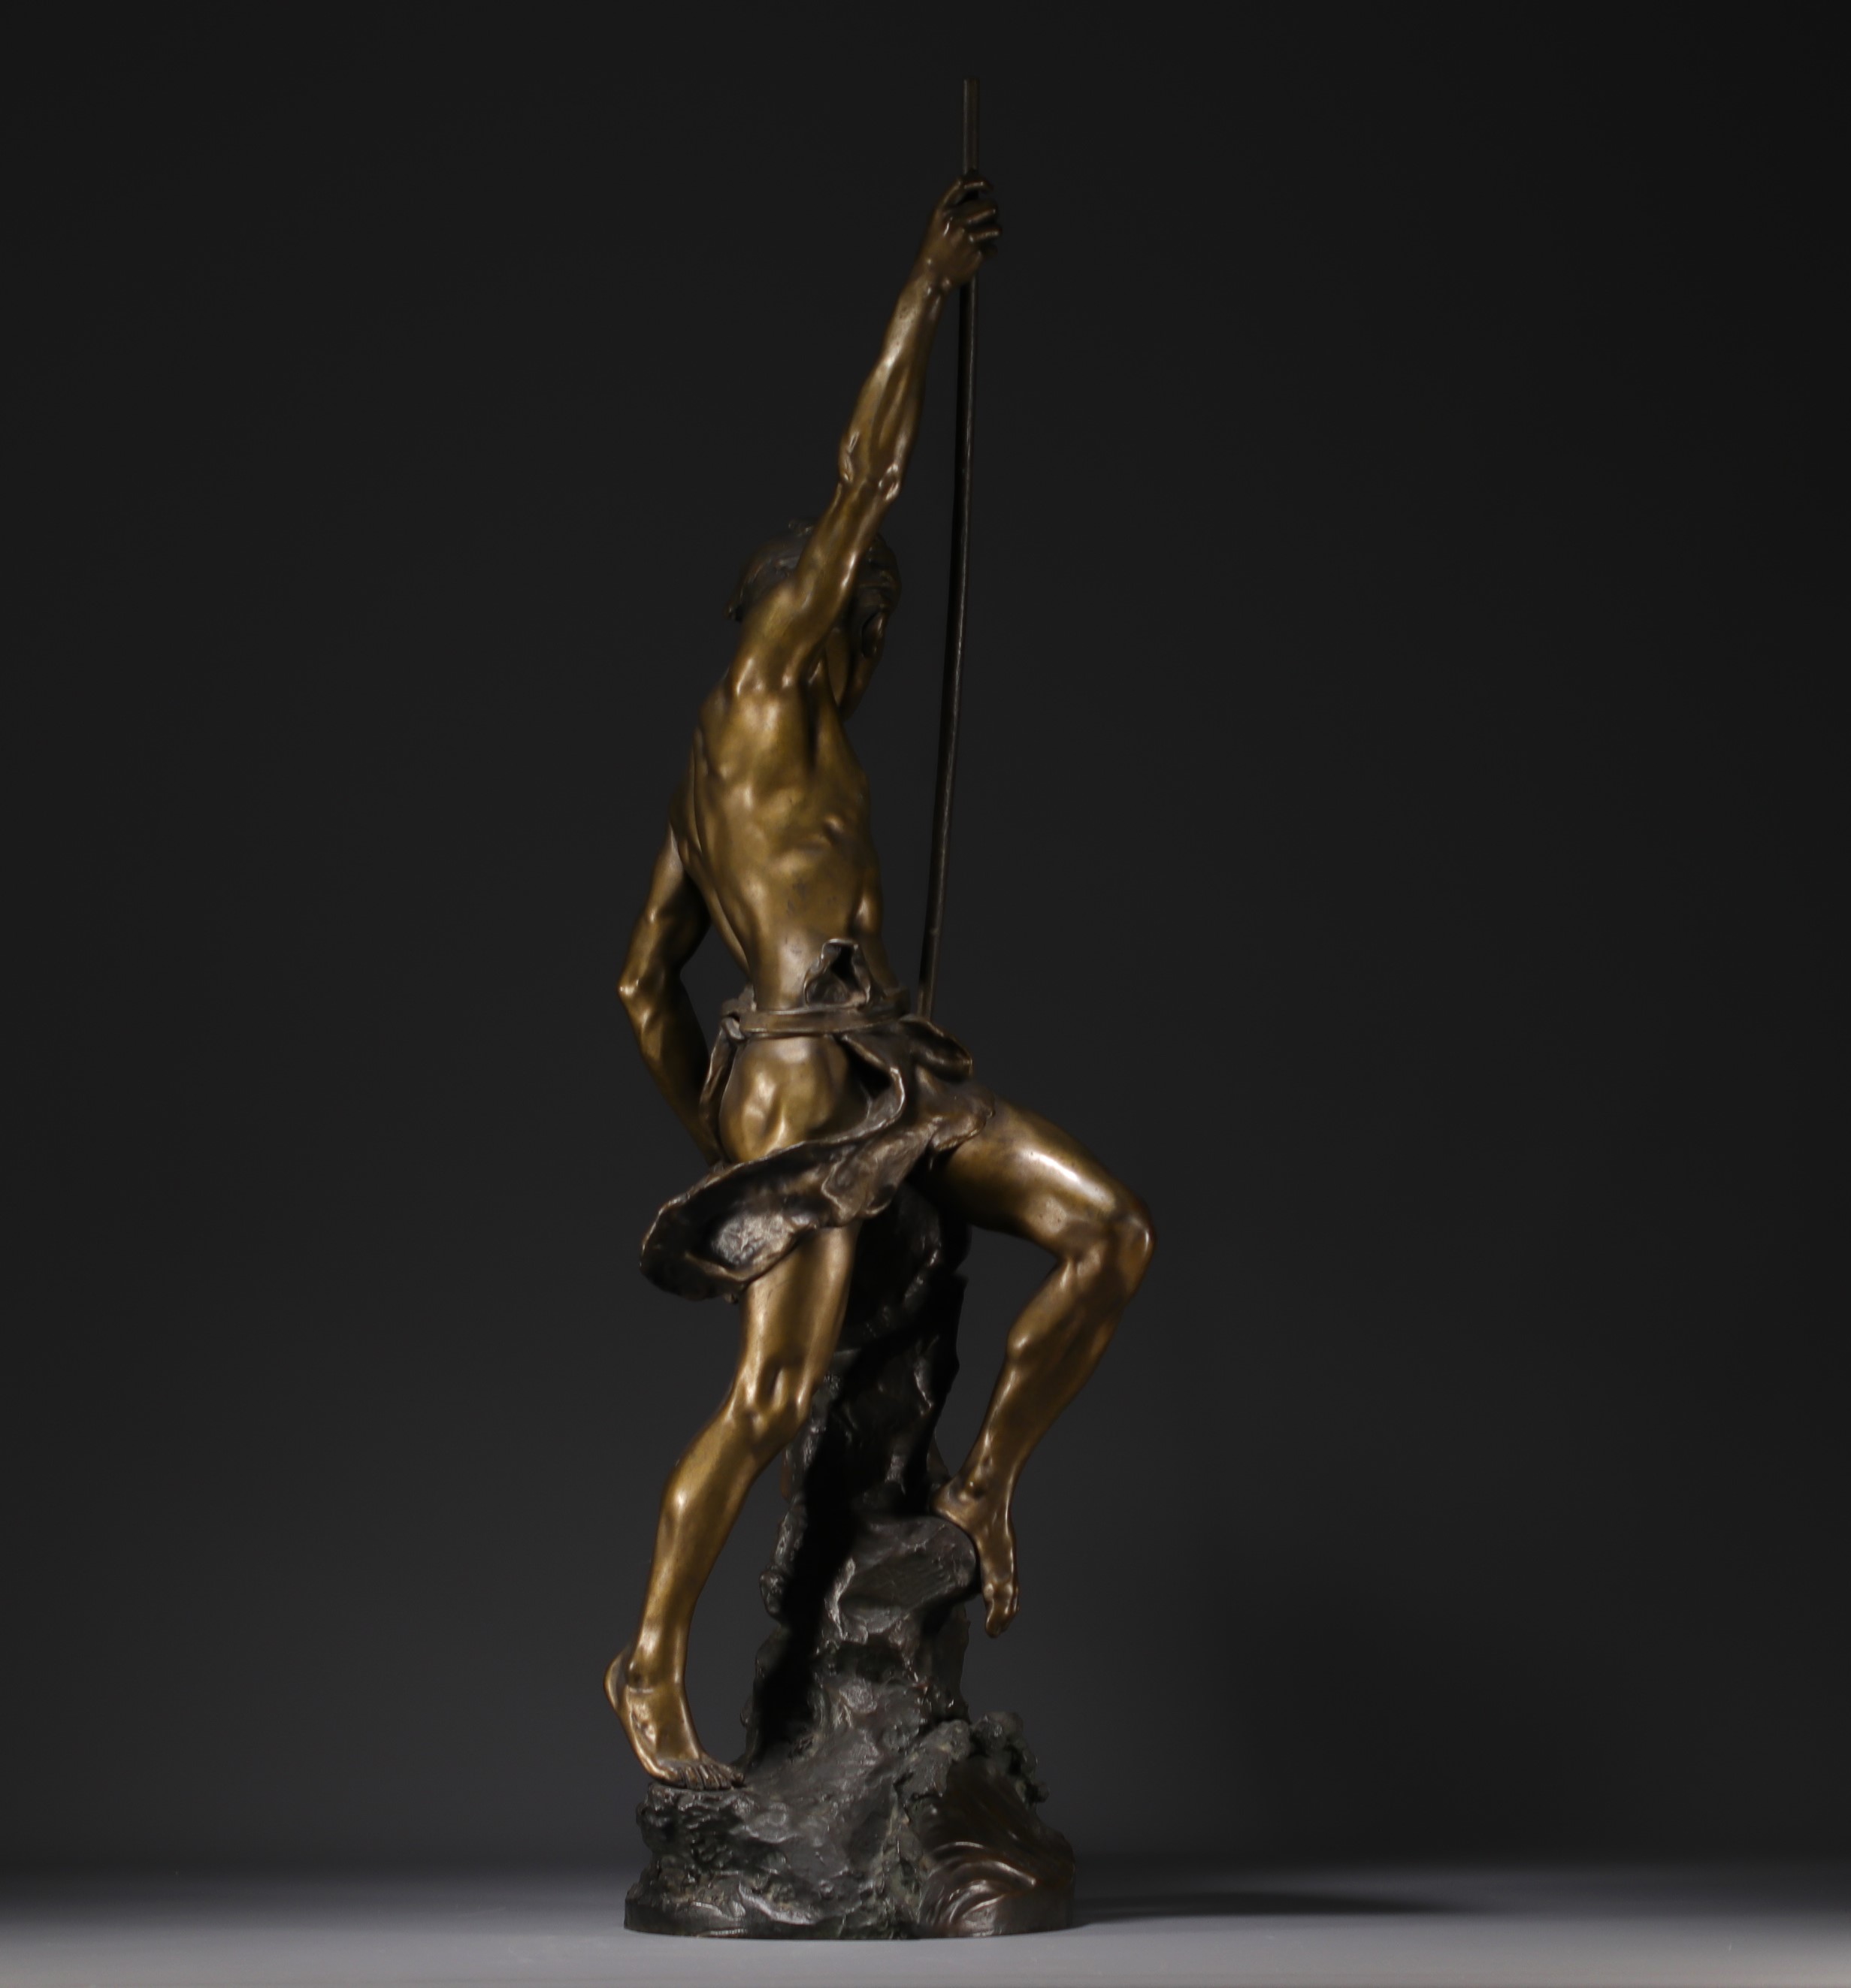 Ernest Justin FERRAND (1846-1932) "The young sinner" Sculpture in chased and patinated bronze. - Image 4 of 7